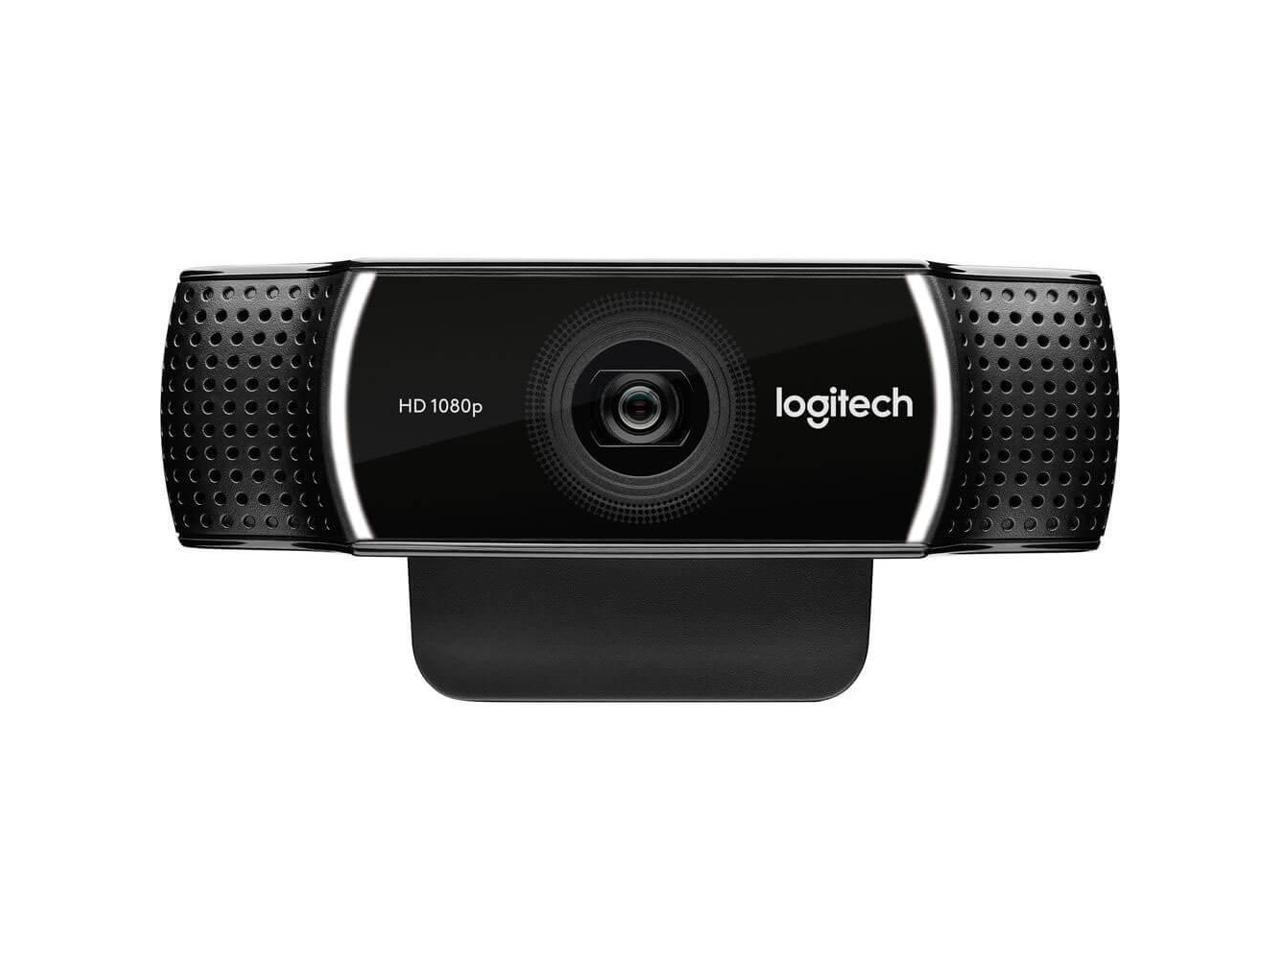 Logitech Pro Stream Webcam 1080P for HD Video Streaming & Recording 720P at 60Fps with Tripod Included Newegg.com